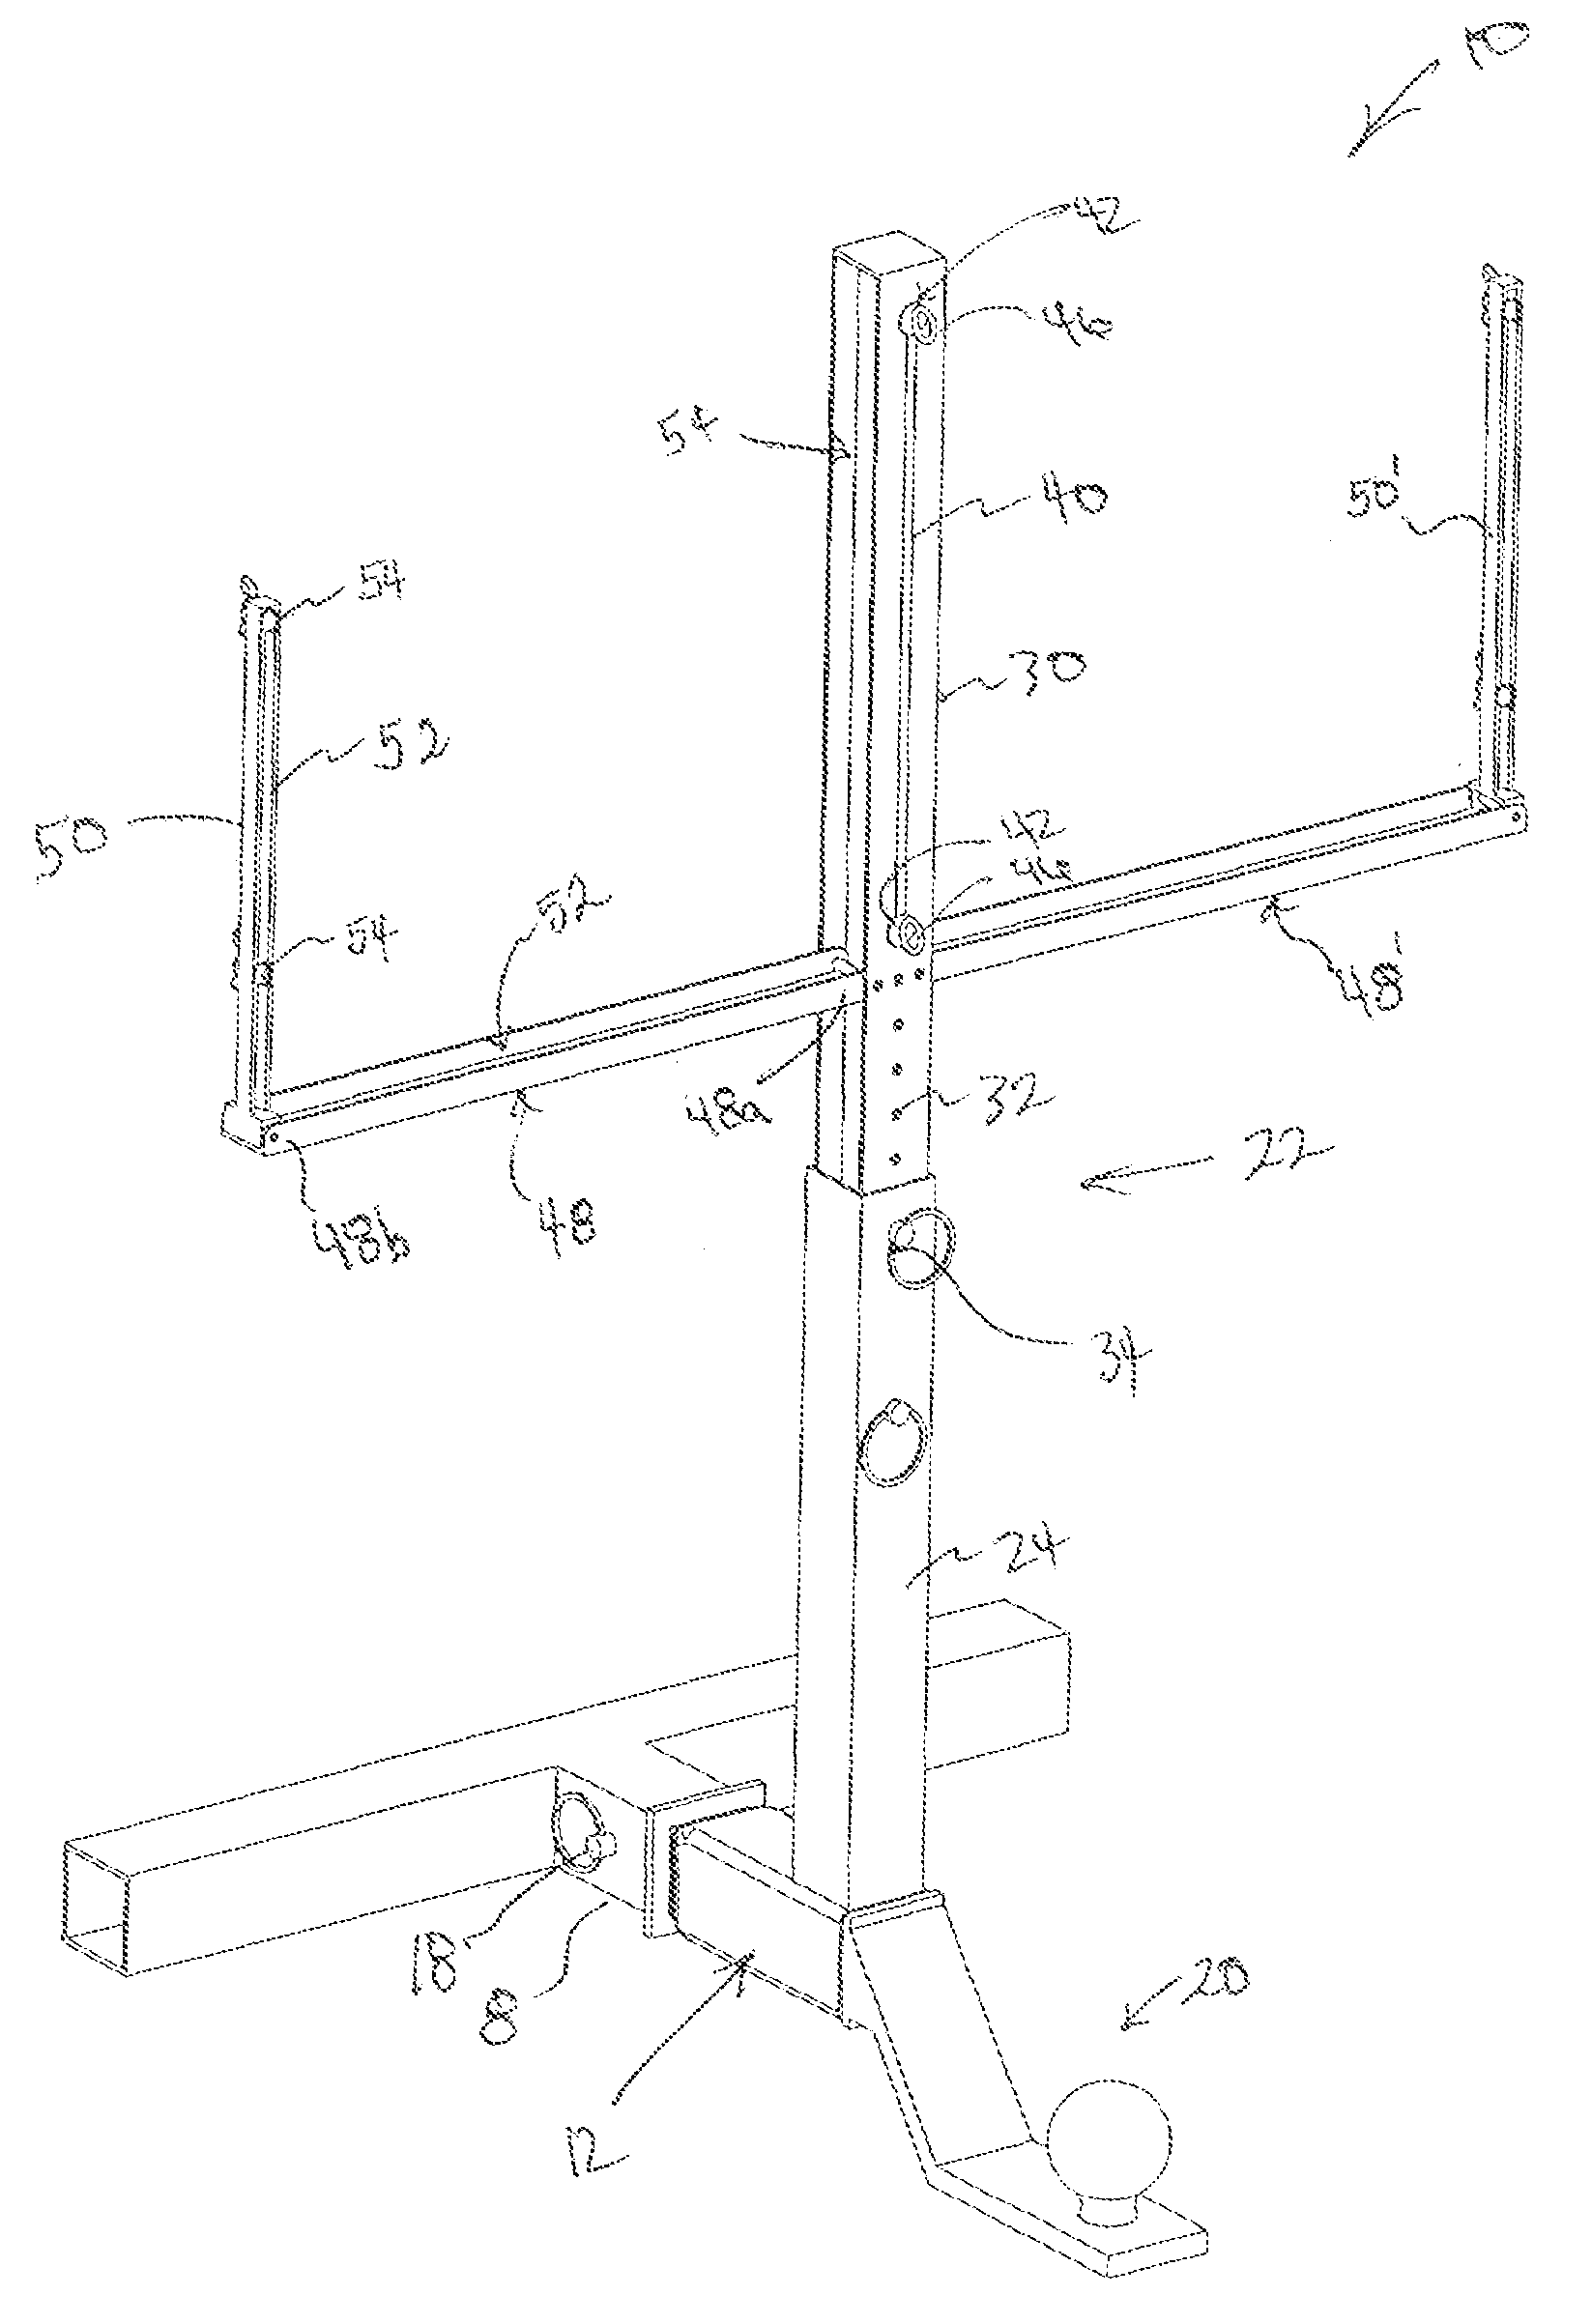 Display Apparatus for a Vehicle Having a Receiver Hitch